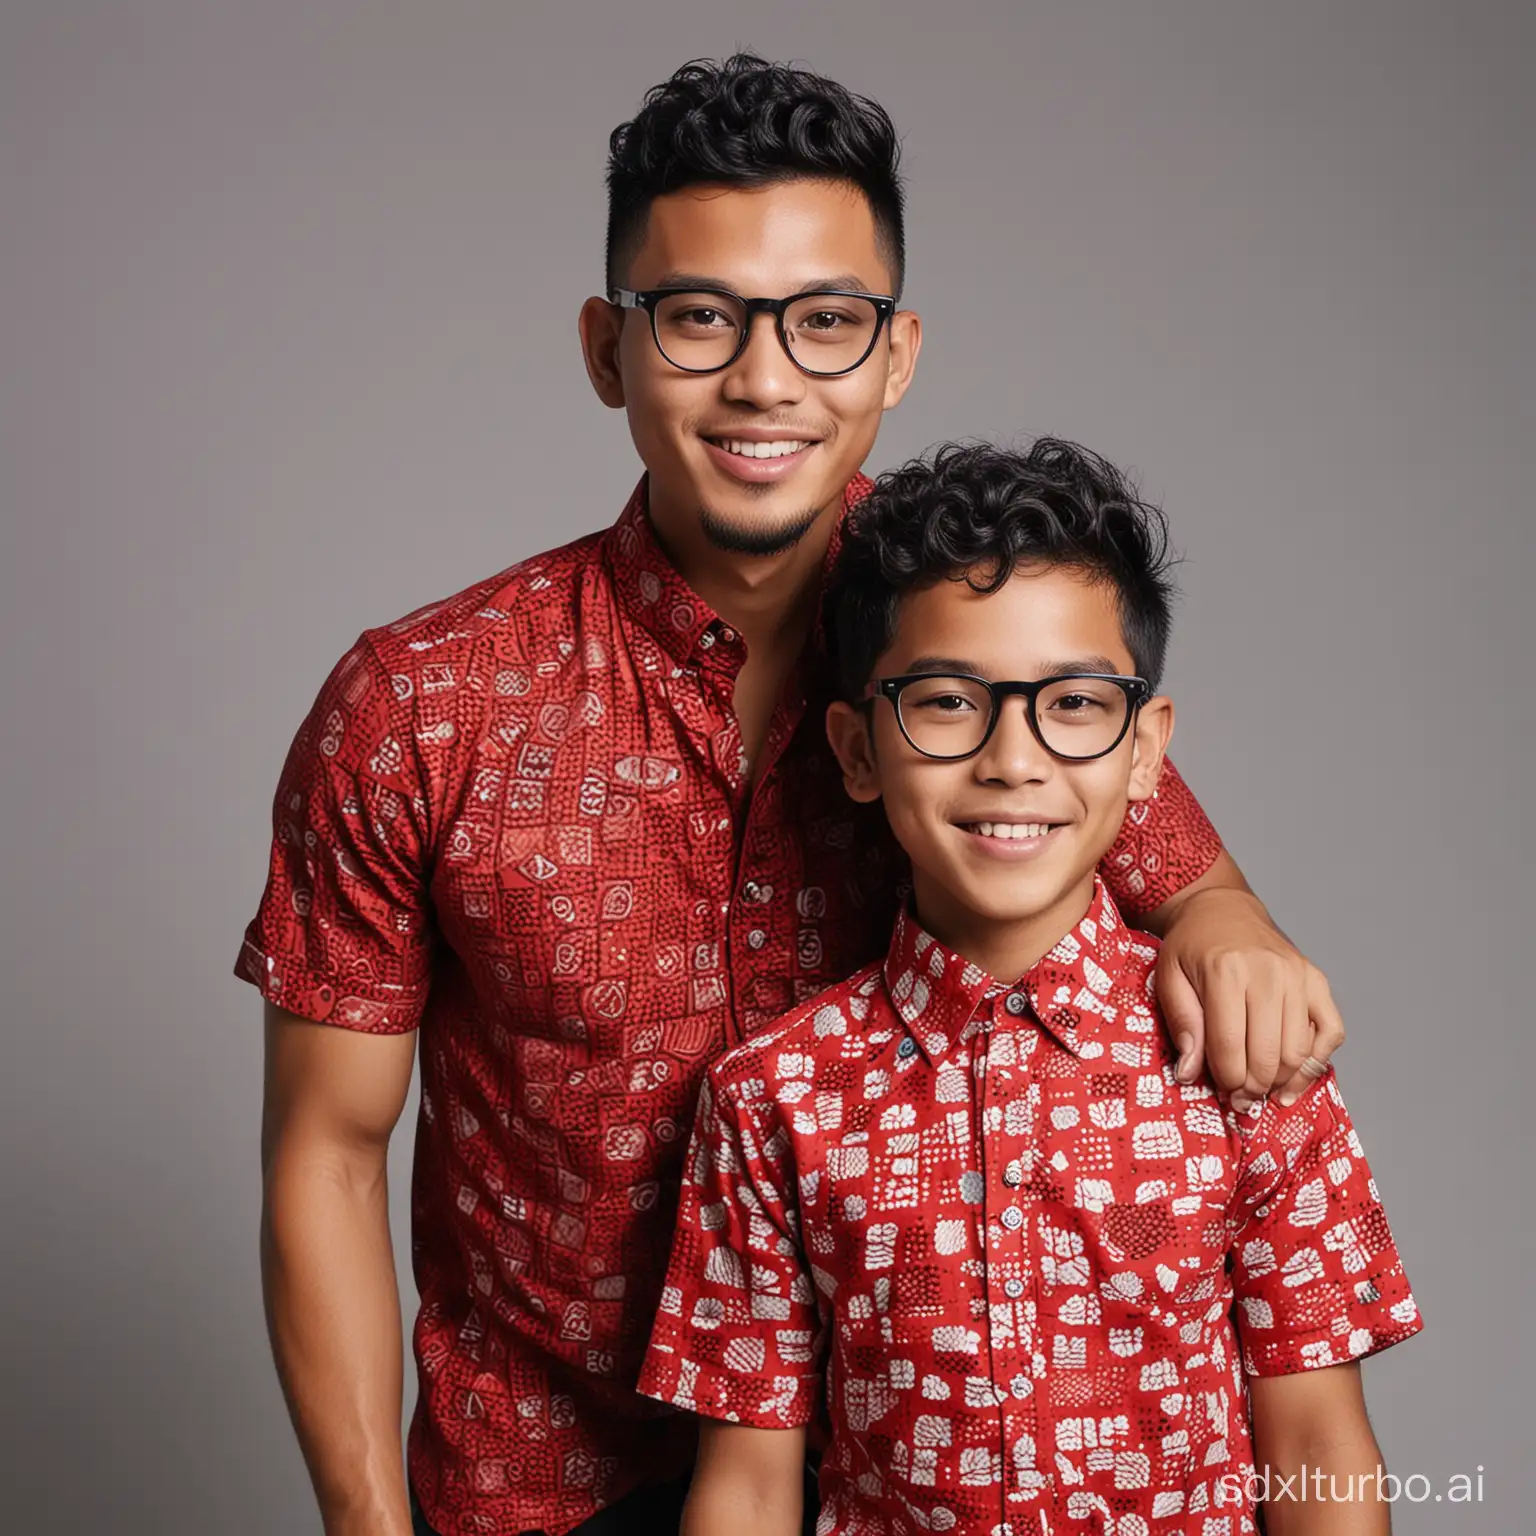 A 32 year old Indonesian man with short curly undercut hair combed neatly, wearing glasses. To the man's right side is a 9 year old child, and to the man's left side is a 7 year old child, with straight hair. they are taking photos in a photo studio. The three of them were both wearing red and black batik shirts, black trousers and white shoes.